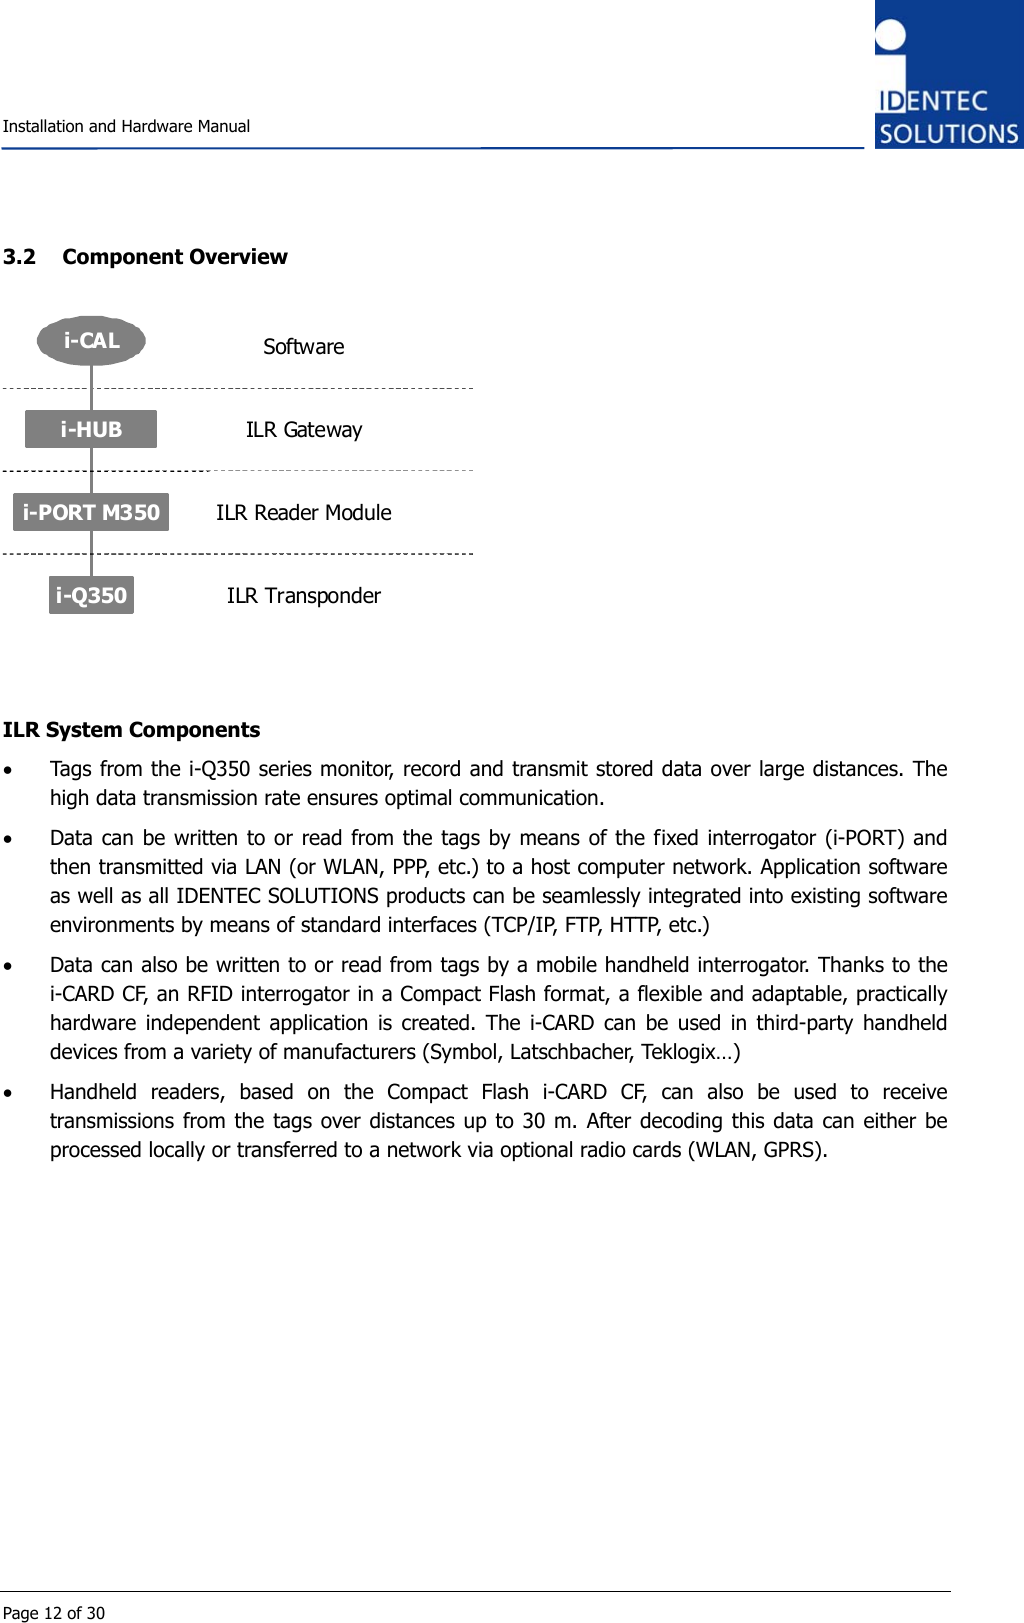    Installation and Hardware Manual  Page 12 of 30 3.2 Component Overview i-CALi-PORT M350i-Q350ILR GatewaySoftwareILR Reader ModuleILR Transponderi-HUB   ILR System Components • Tags from the i-Q350 series monitor, record and transmit stored data over large distances. The high data transmission rate ensures optimal communication. • Data can be written to or read from the tags by means of the fixed interrogator (i-PORT) and then transmitted via LAN (or WLAN, PPP, etc.) to a host computer network. Application software as well as all IDENTEC SOLUTIONS products can be seamlessly integrated into existing software environments by means of standard interfaces (TCP/IP, FTP, HTTP, etc.) • Data can also be written to or read from tags by a mobile handheld interrogator. Thanks to the i-CARD CF, an RFID interrogator in a Compact Flash format, a flexible and adaptable, practically hardware independent application is created. The i-CARD can be used in third-party handheld devices from a variety of manufacturers (Symbol, Latschbacher, Teklogix…) • Handheld readers, based on the Compact Flash i-CARD CF, can also be used to receive transmissions from the tags over distances up to 30 m. After decoding this data can either be processed locally or transferred to a network via optional radio cards (WLAN, GPRS).             